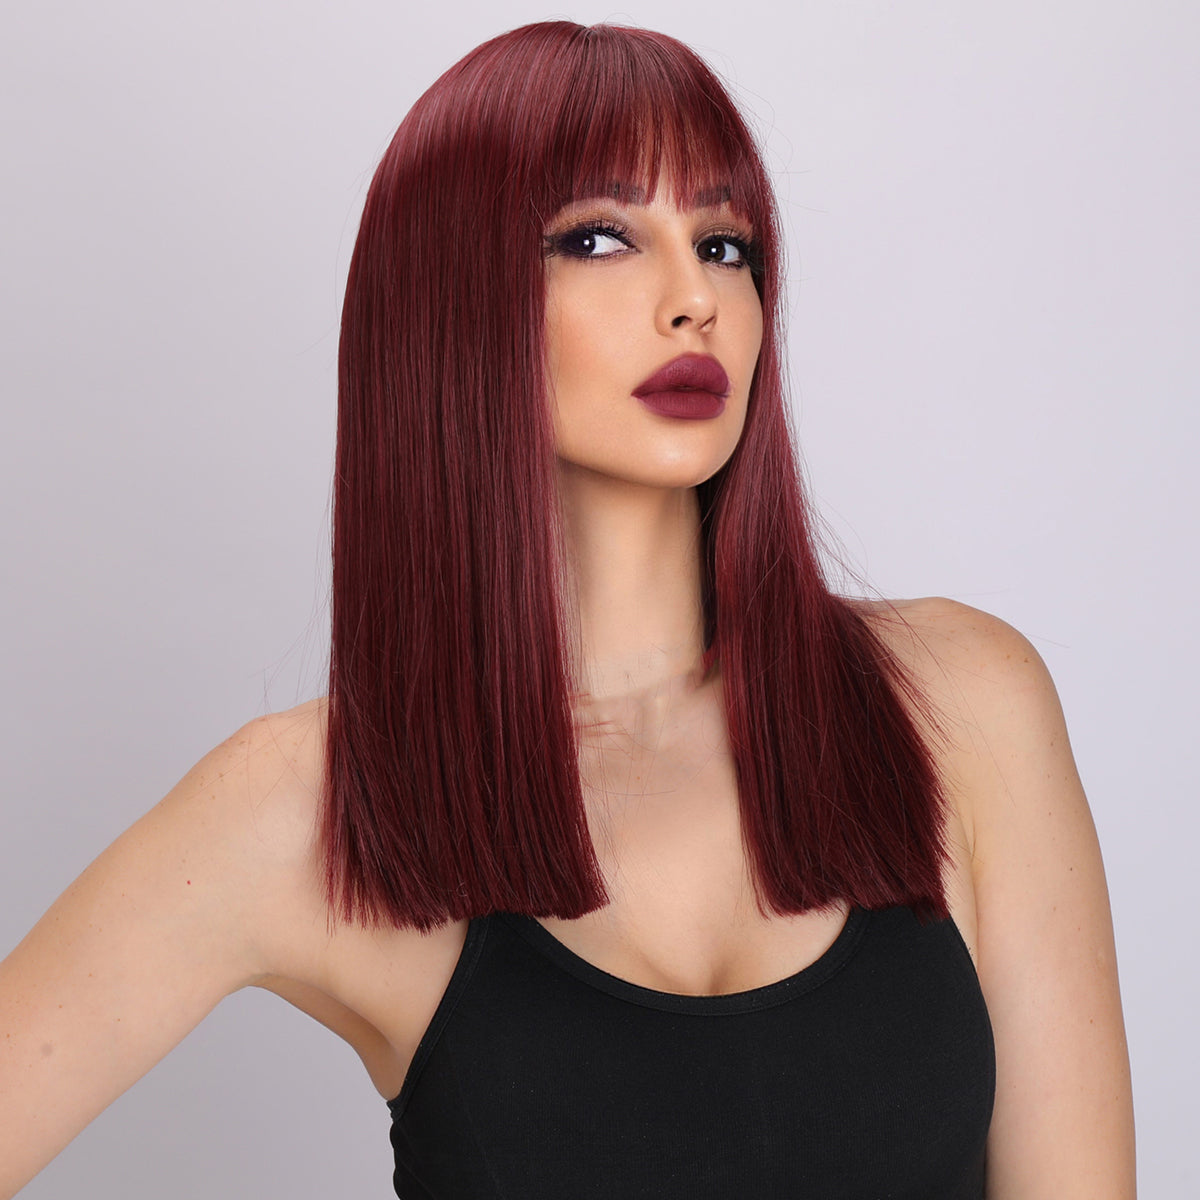 Kimberly | Wine Red Wig | Straight Hair Wig | 18 inch Wig | TM Pop